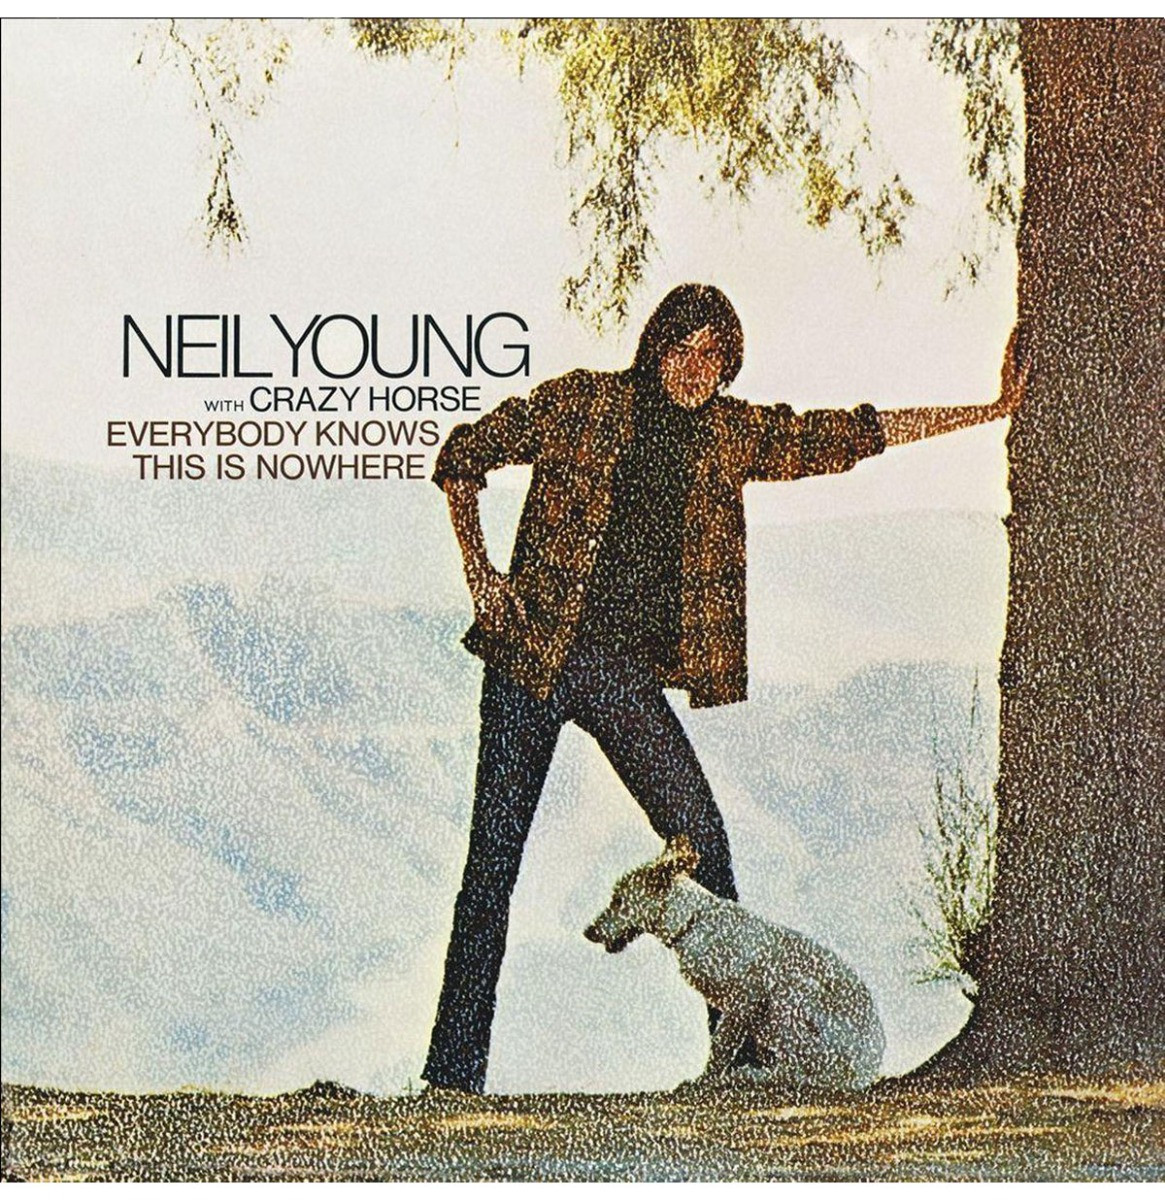 Neil Young With Crazy Horse - Everybody Knows This Is Nowhere LP